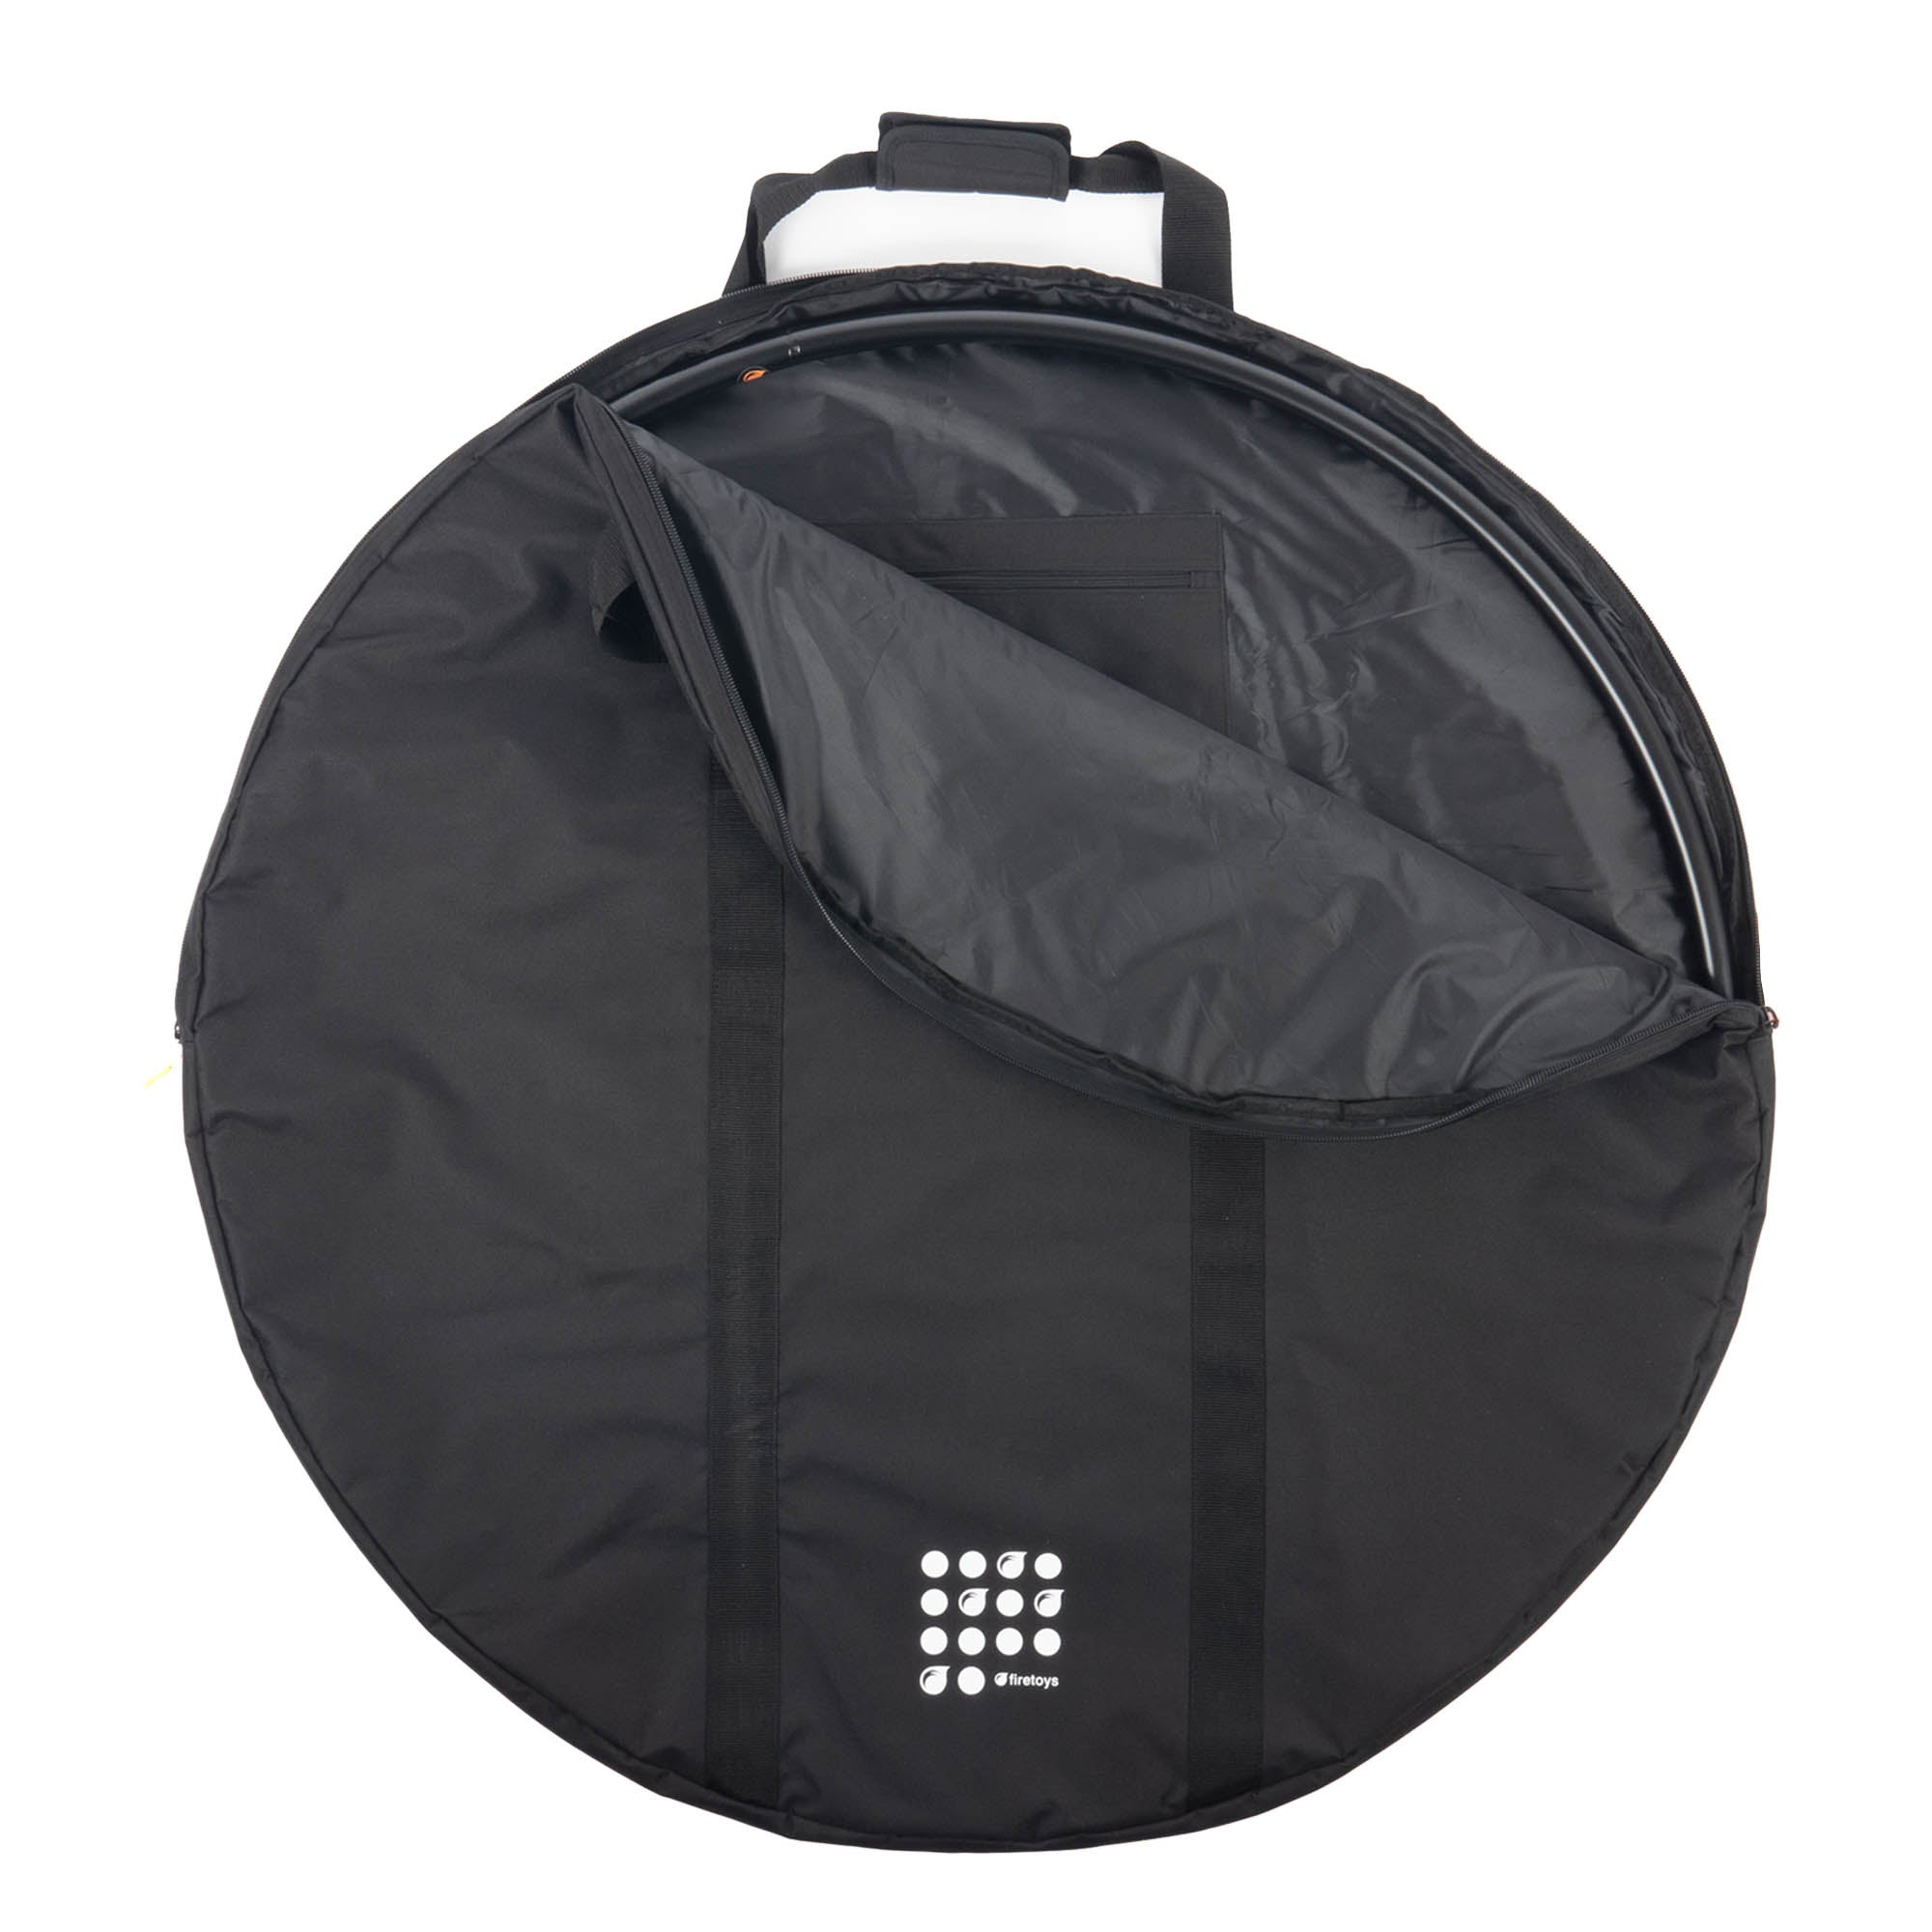 full large bag partly open with hoop